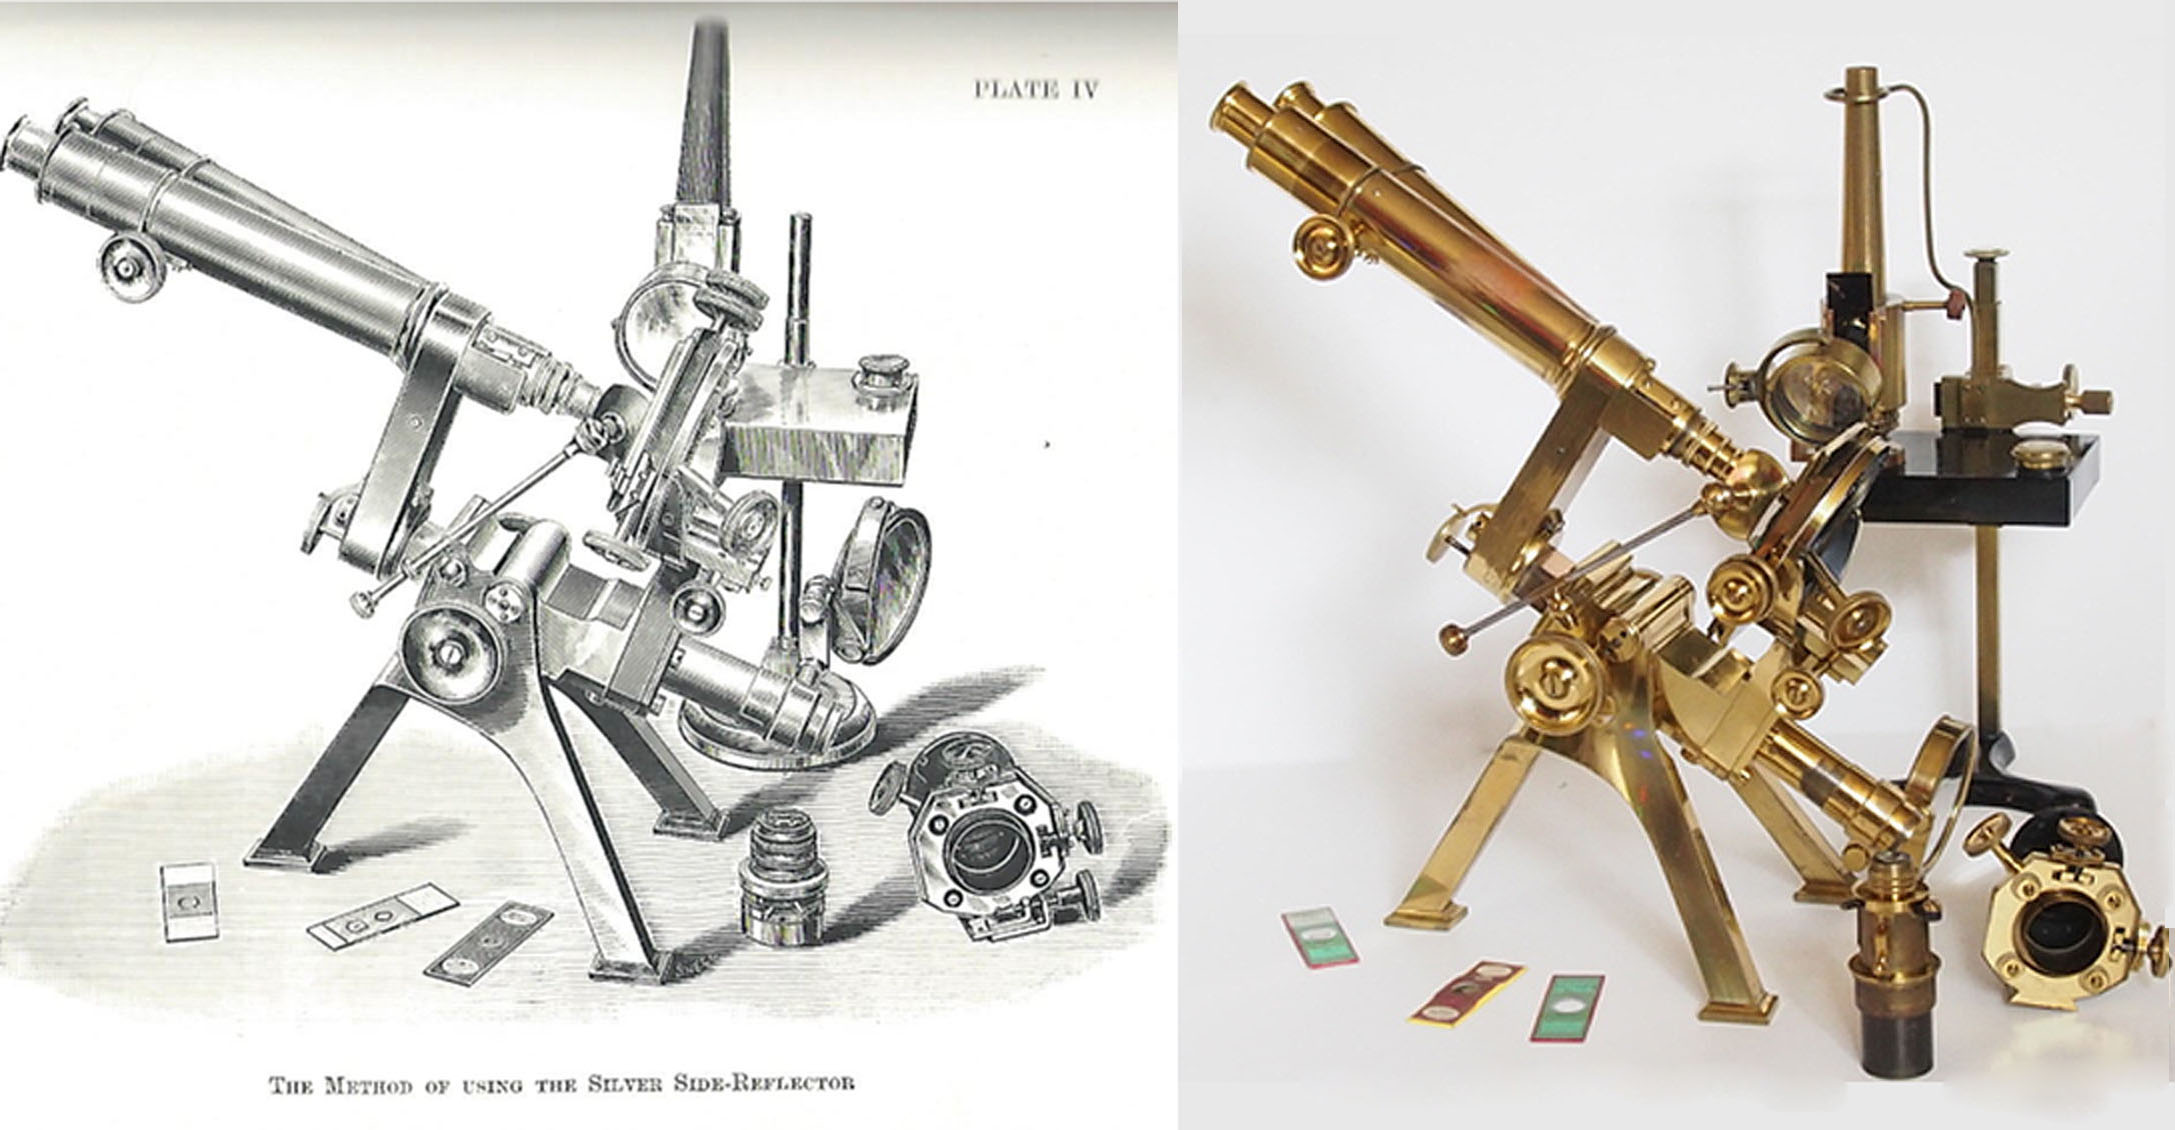 P and L microscope 